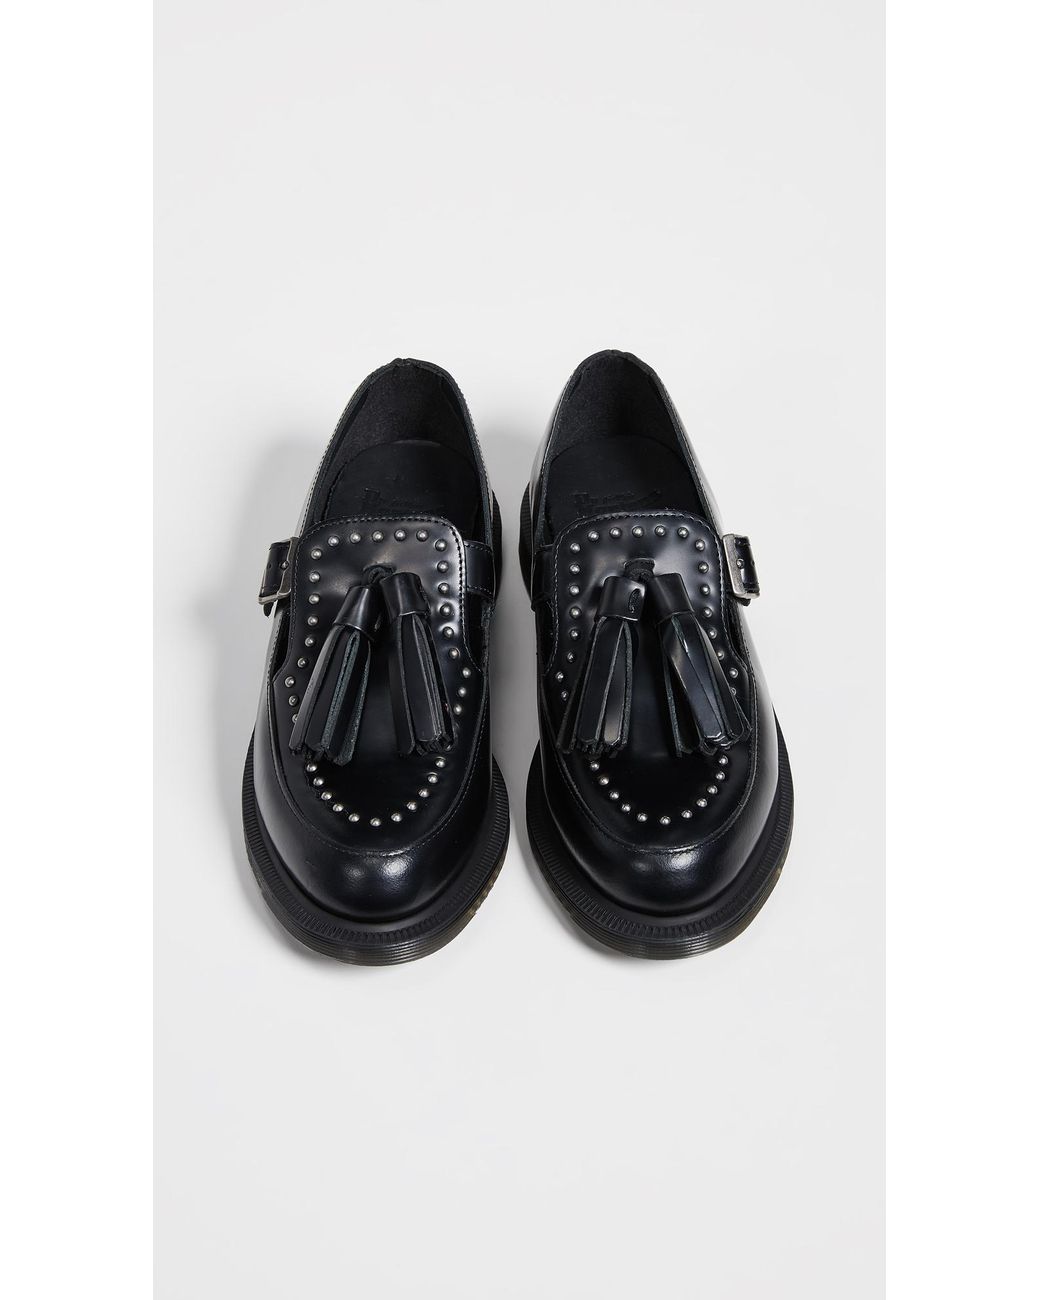 Dr. Martens Mary Jane Shoes in Black |